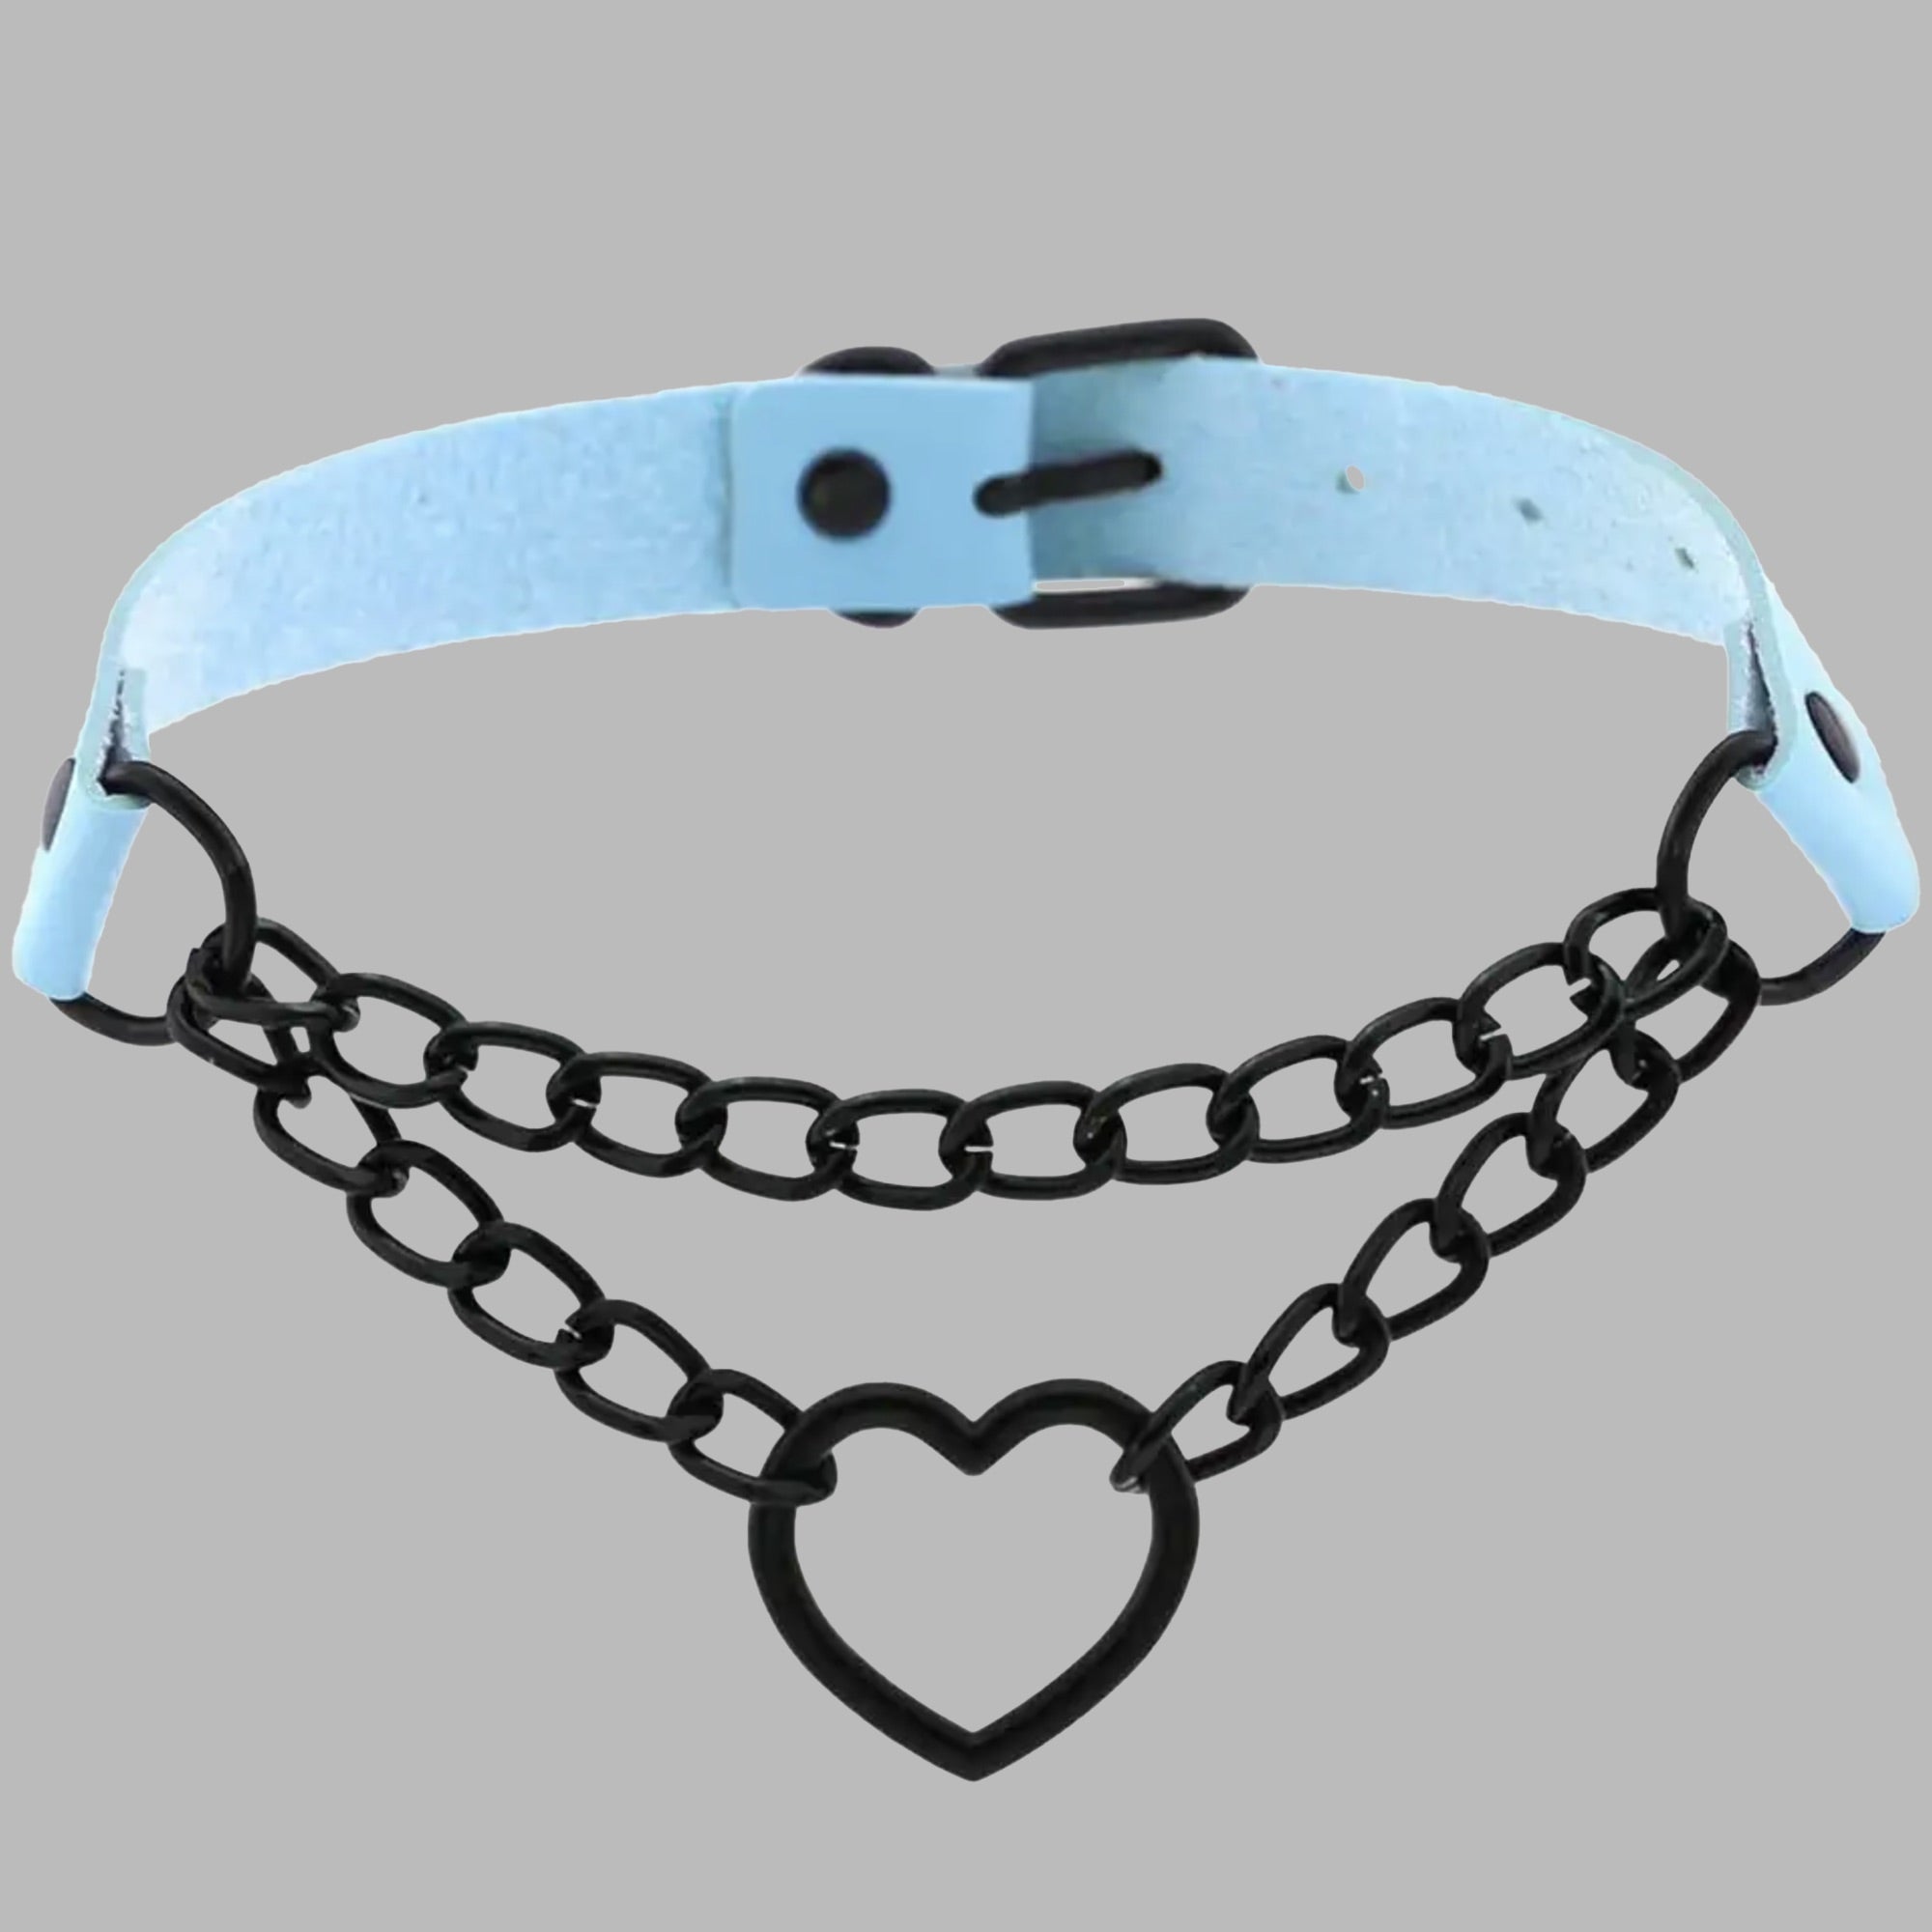 Chained Heart Choker - Baby Blue & Black